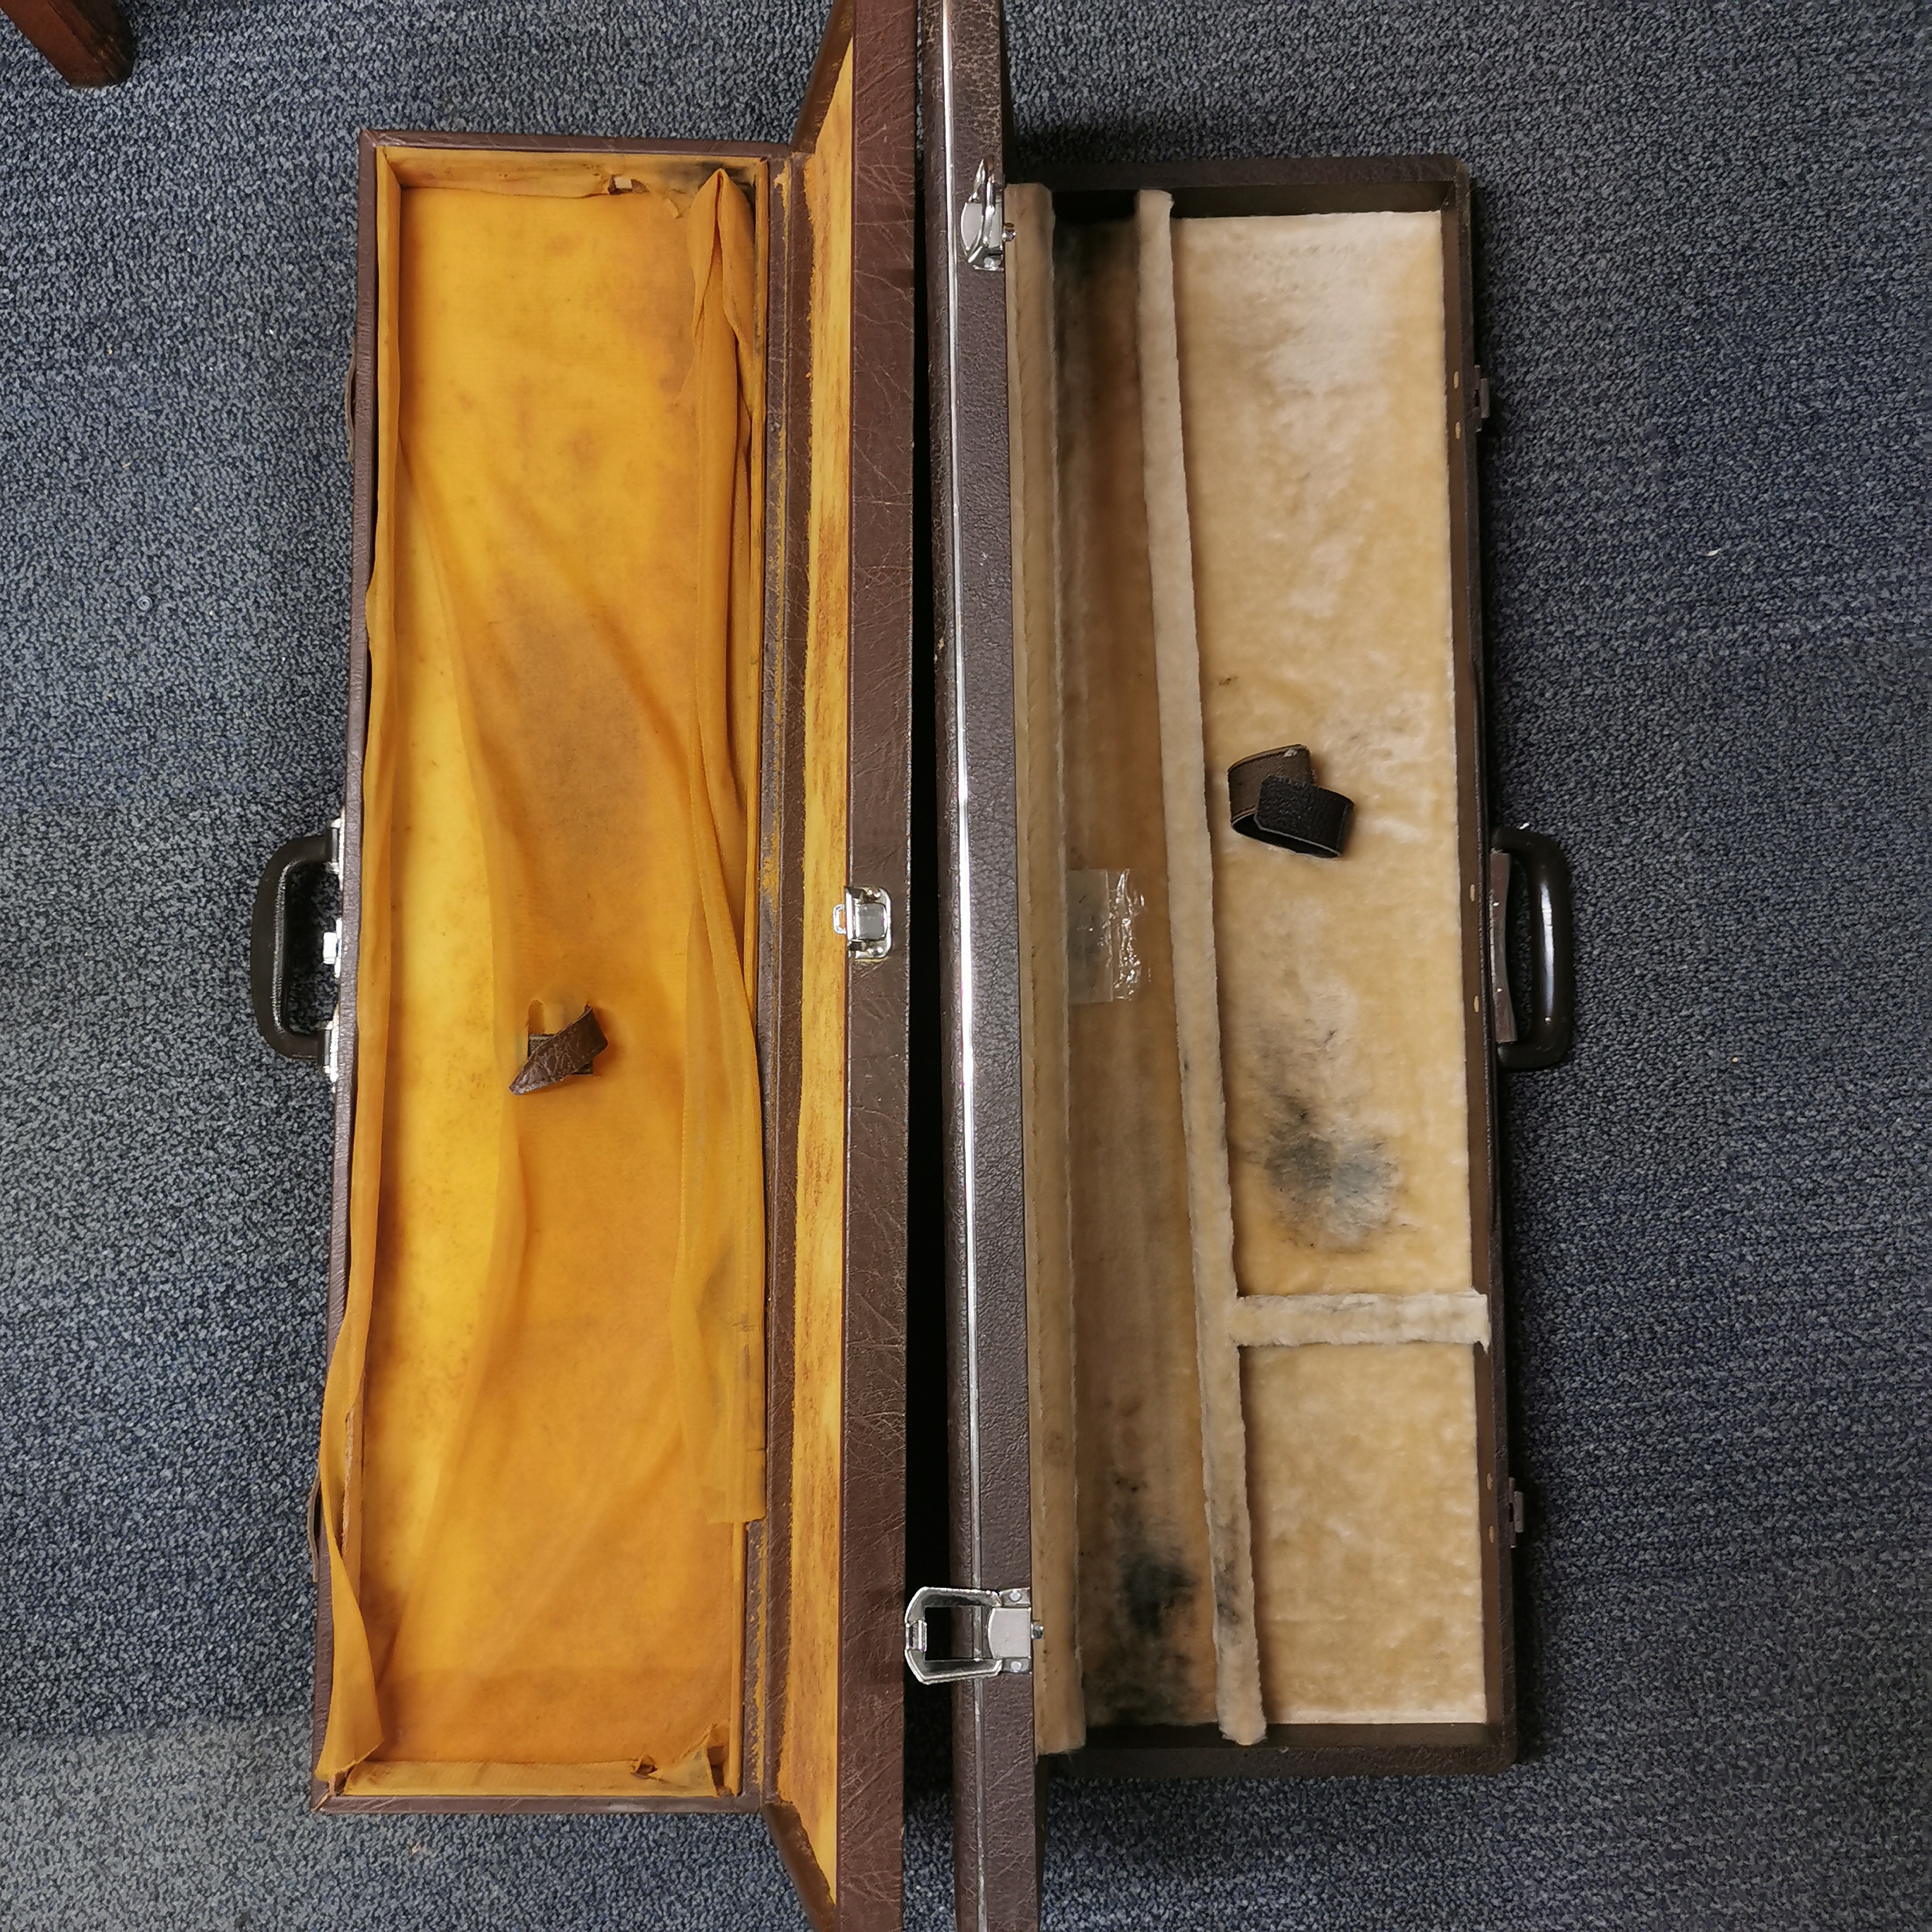 A group of two useful cases, 86 x 24 x 8cm. - Image 3 of 3